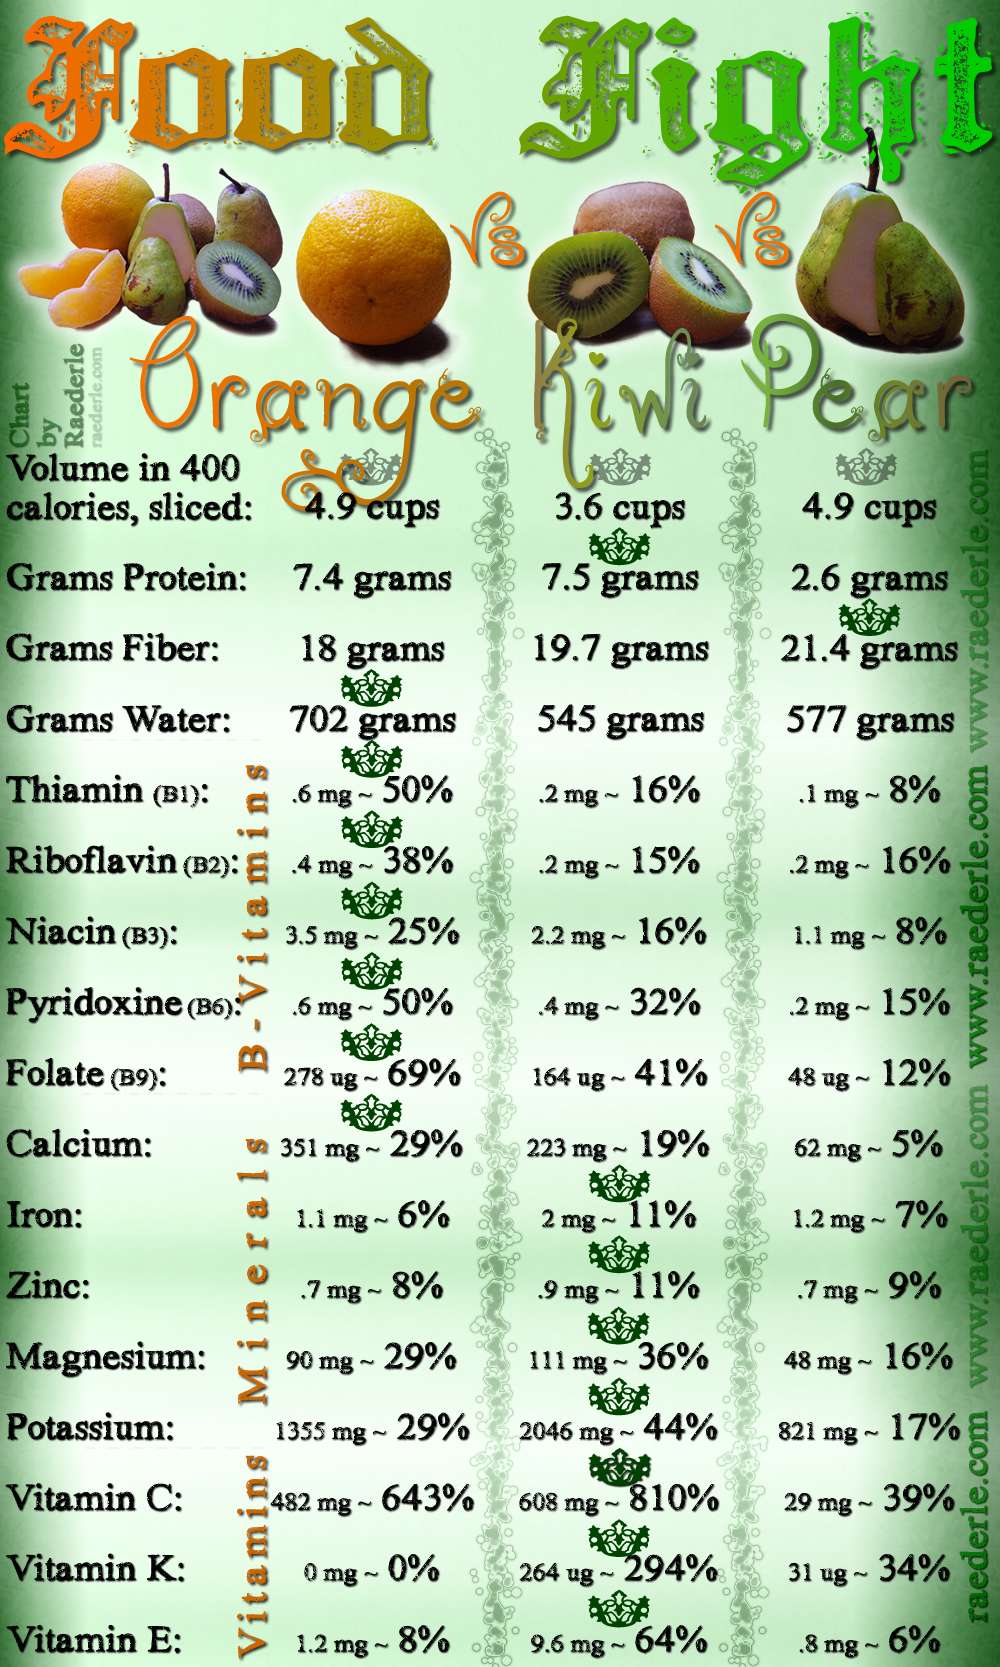 Raederle's Food Fight Chart Comparing Kiwis Oranges and Pears